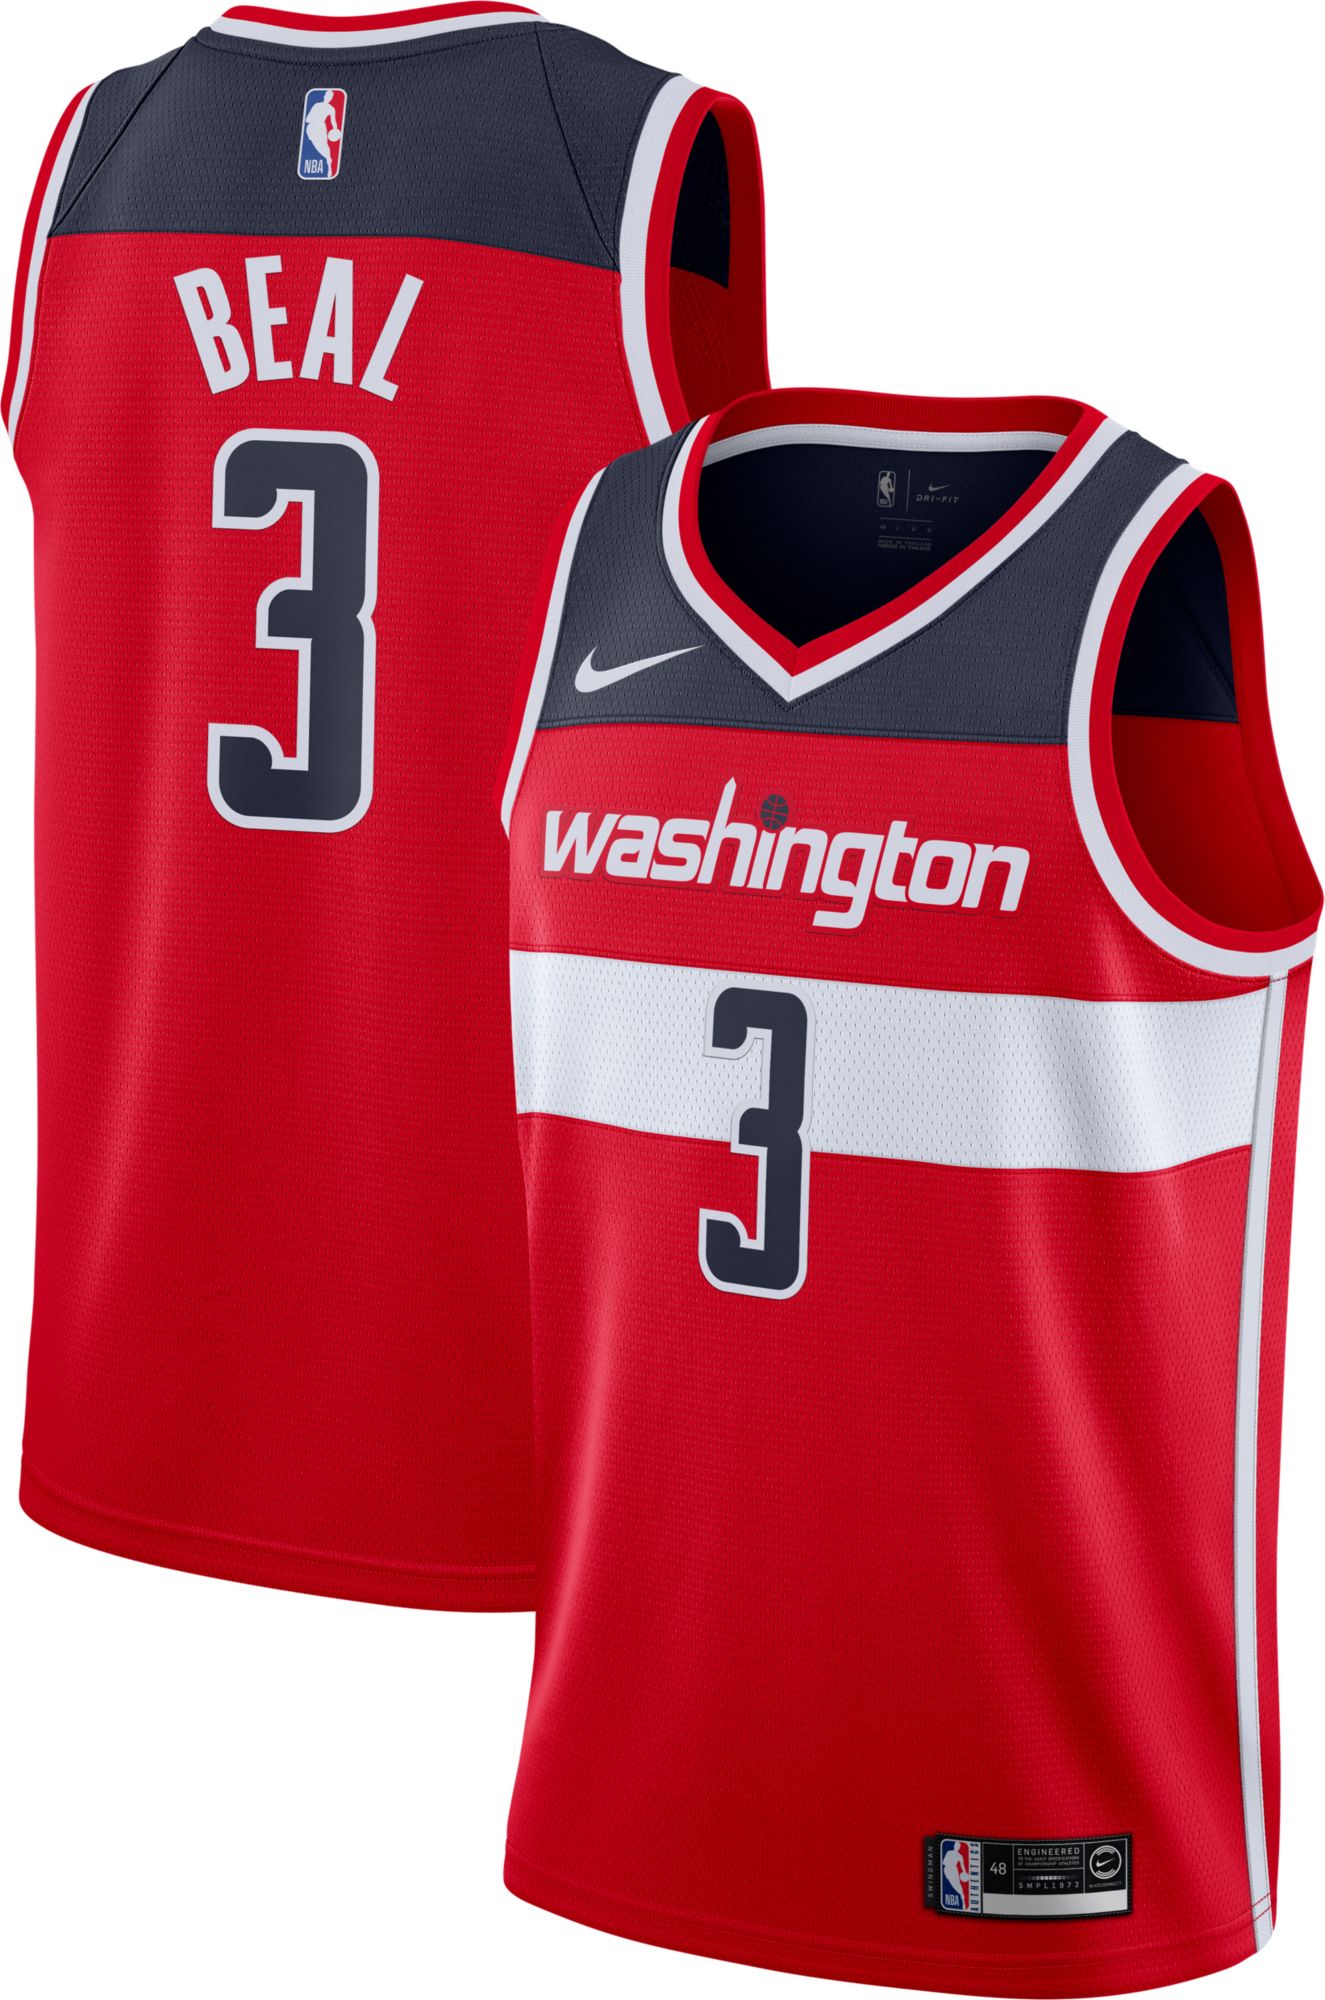 wizards red jersey